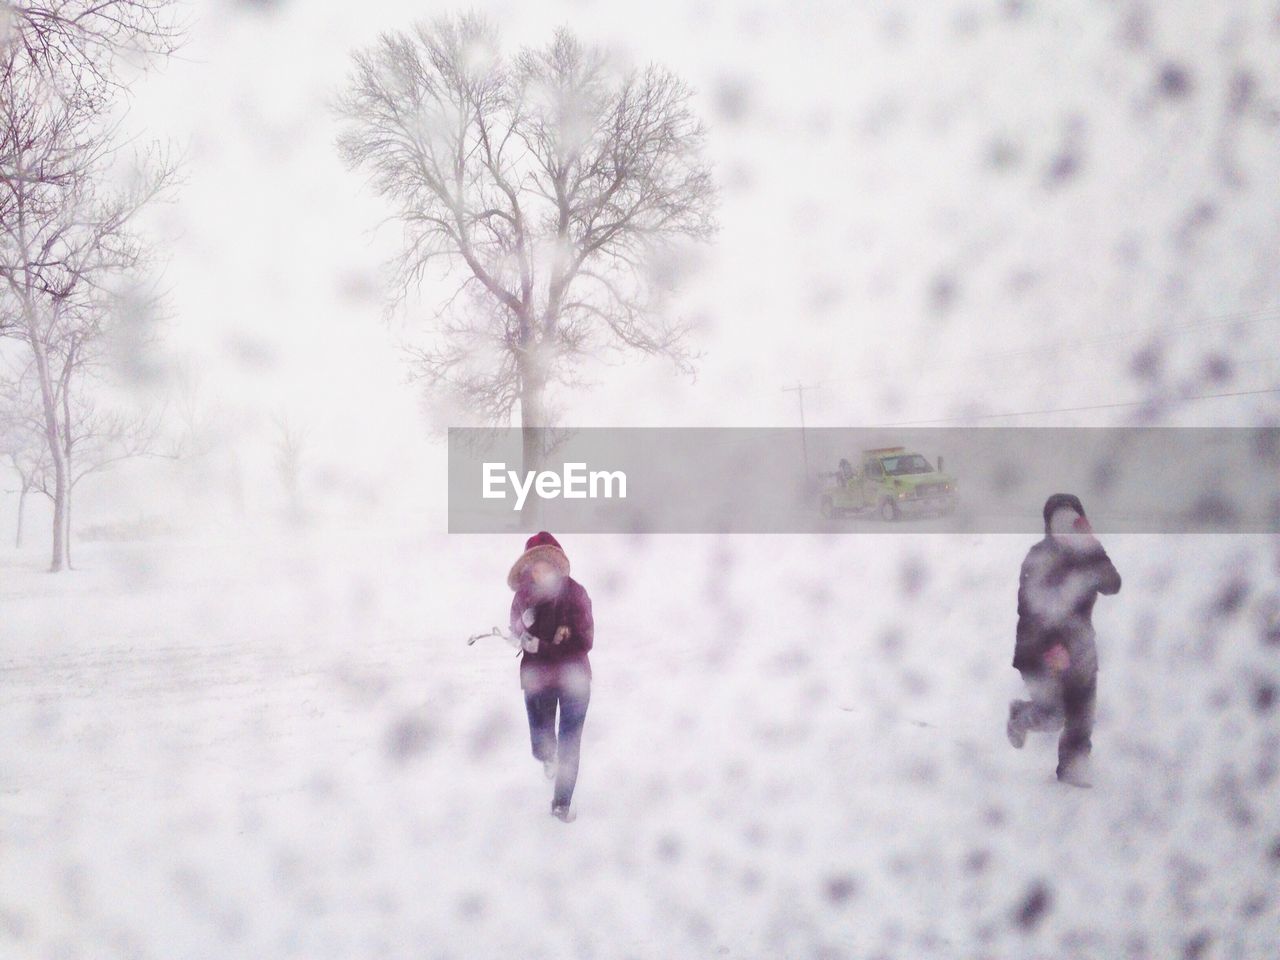 People on snow covered field seen through car window